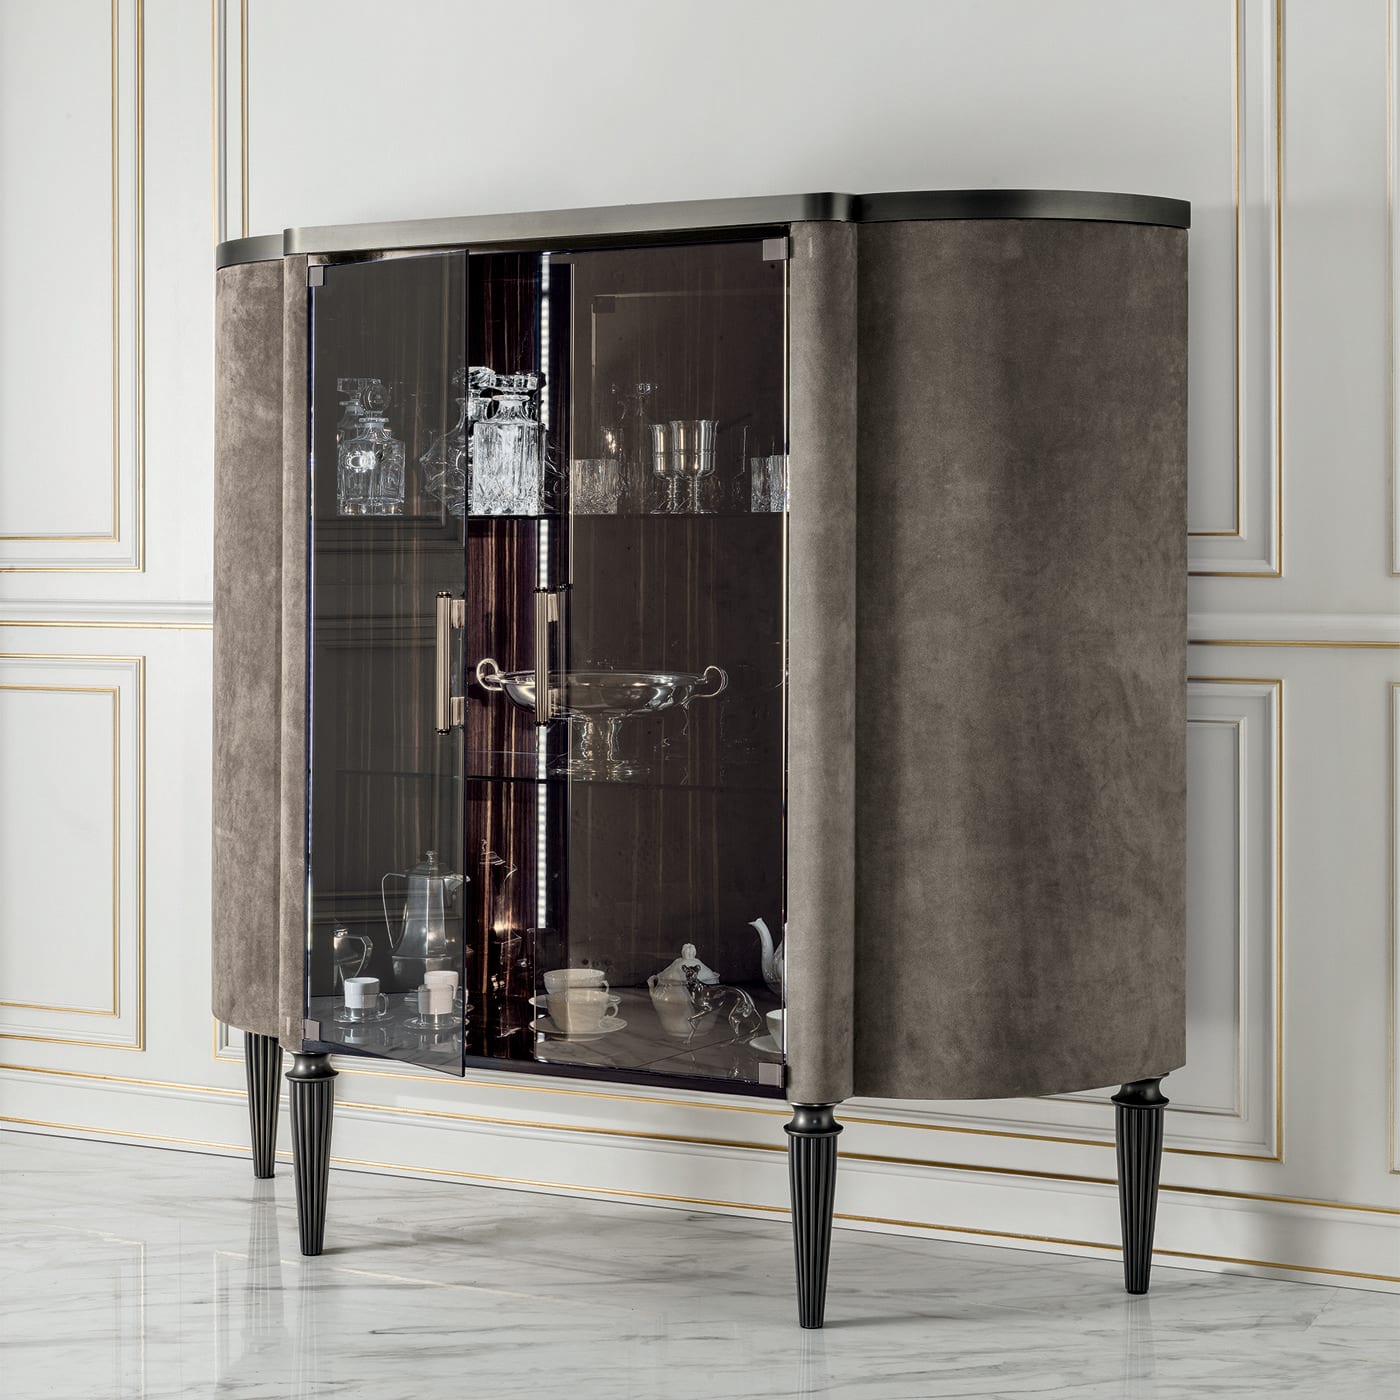 Kate Tall Display Cabinet by Giuseppe Iasparra - Longhi